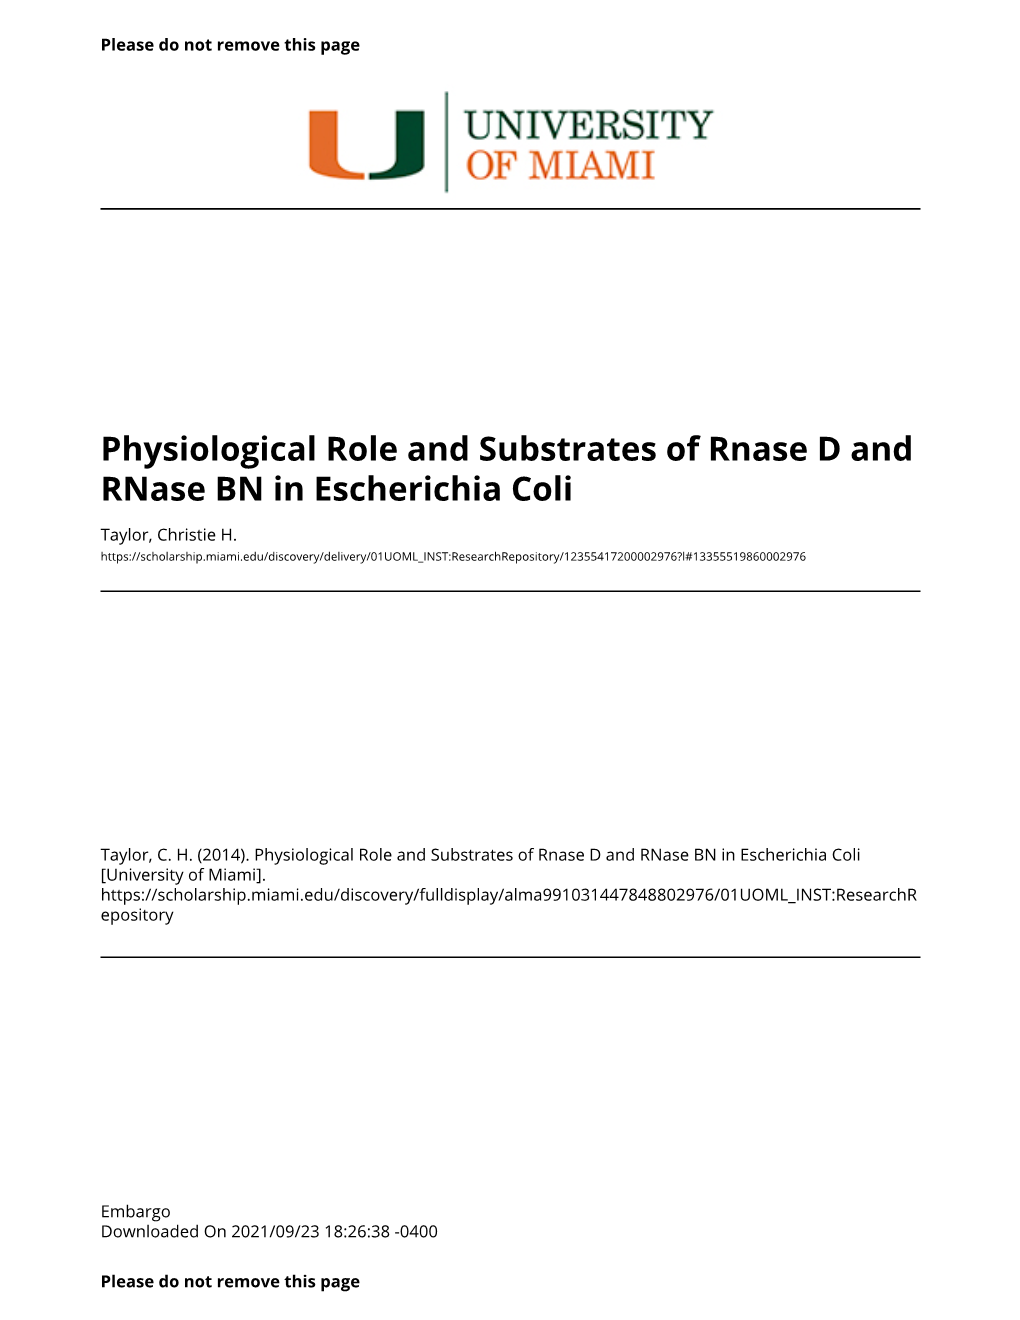 Physiological Role and Substrates of Rnase D and Rnase BN in Escherichia Coli